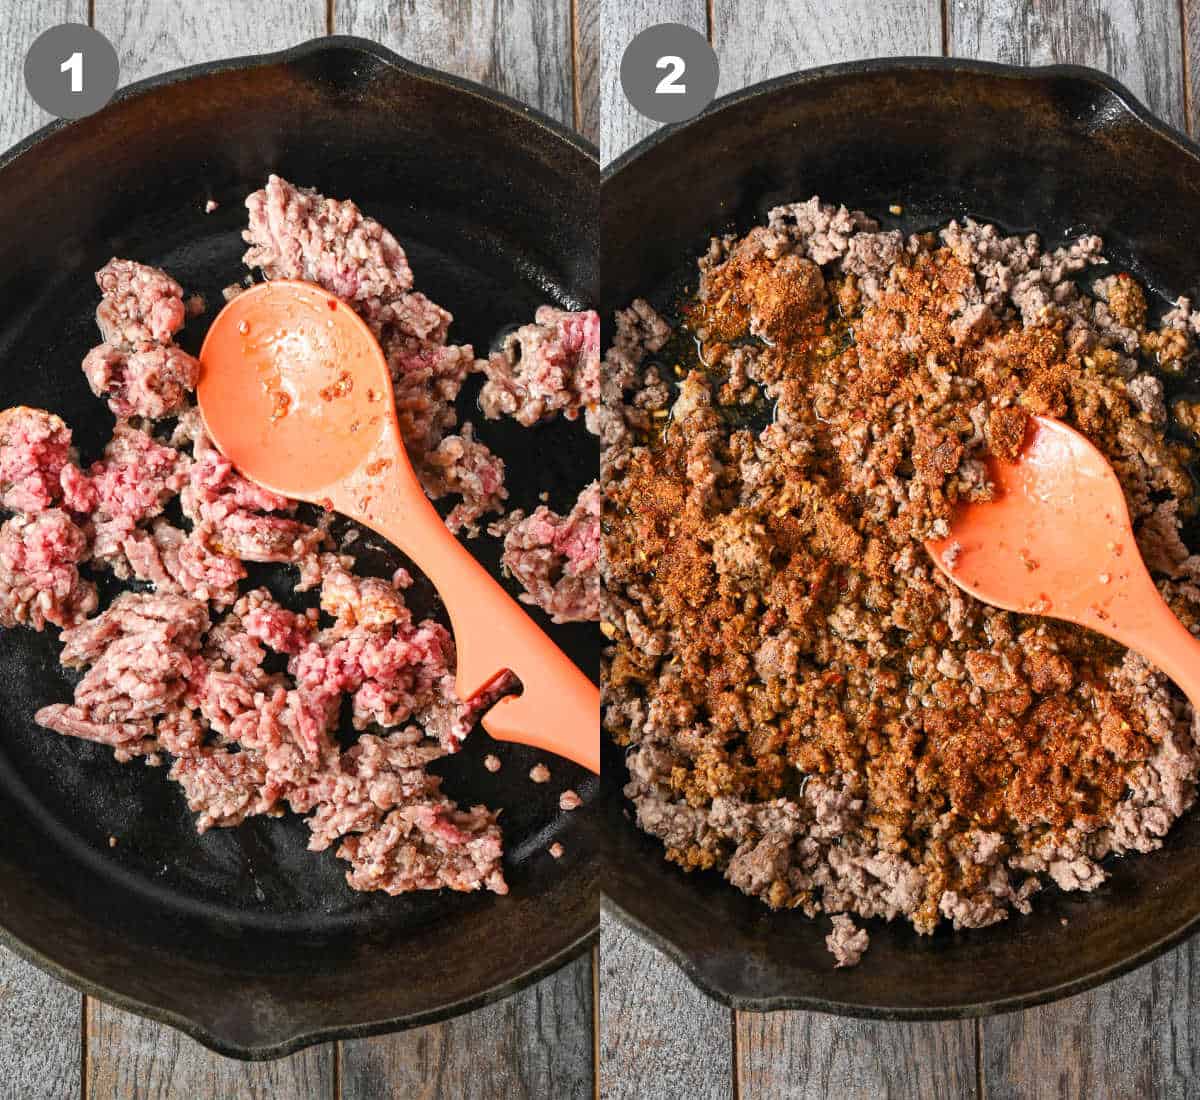 Ground beef being cooked in a skillet.